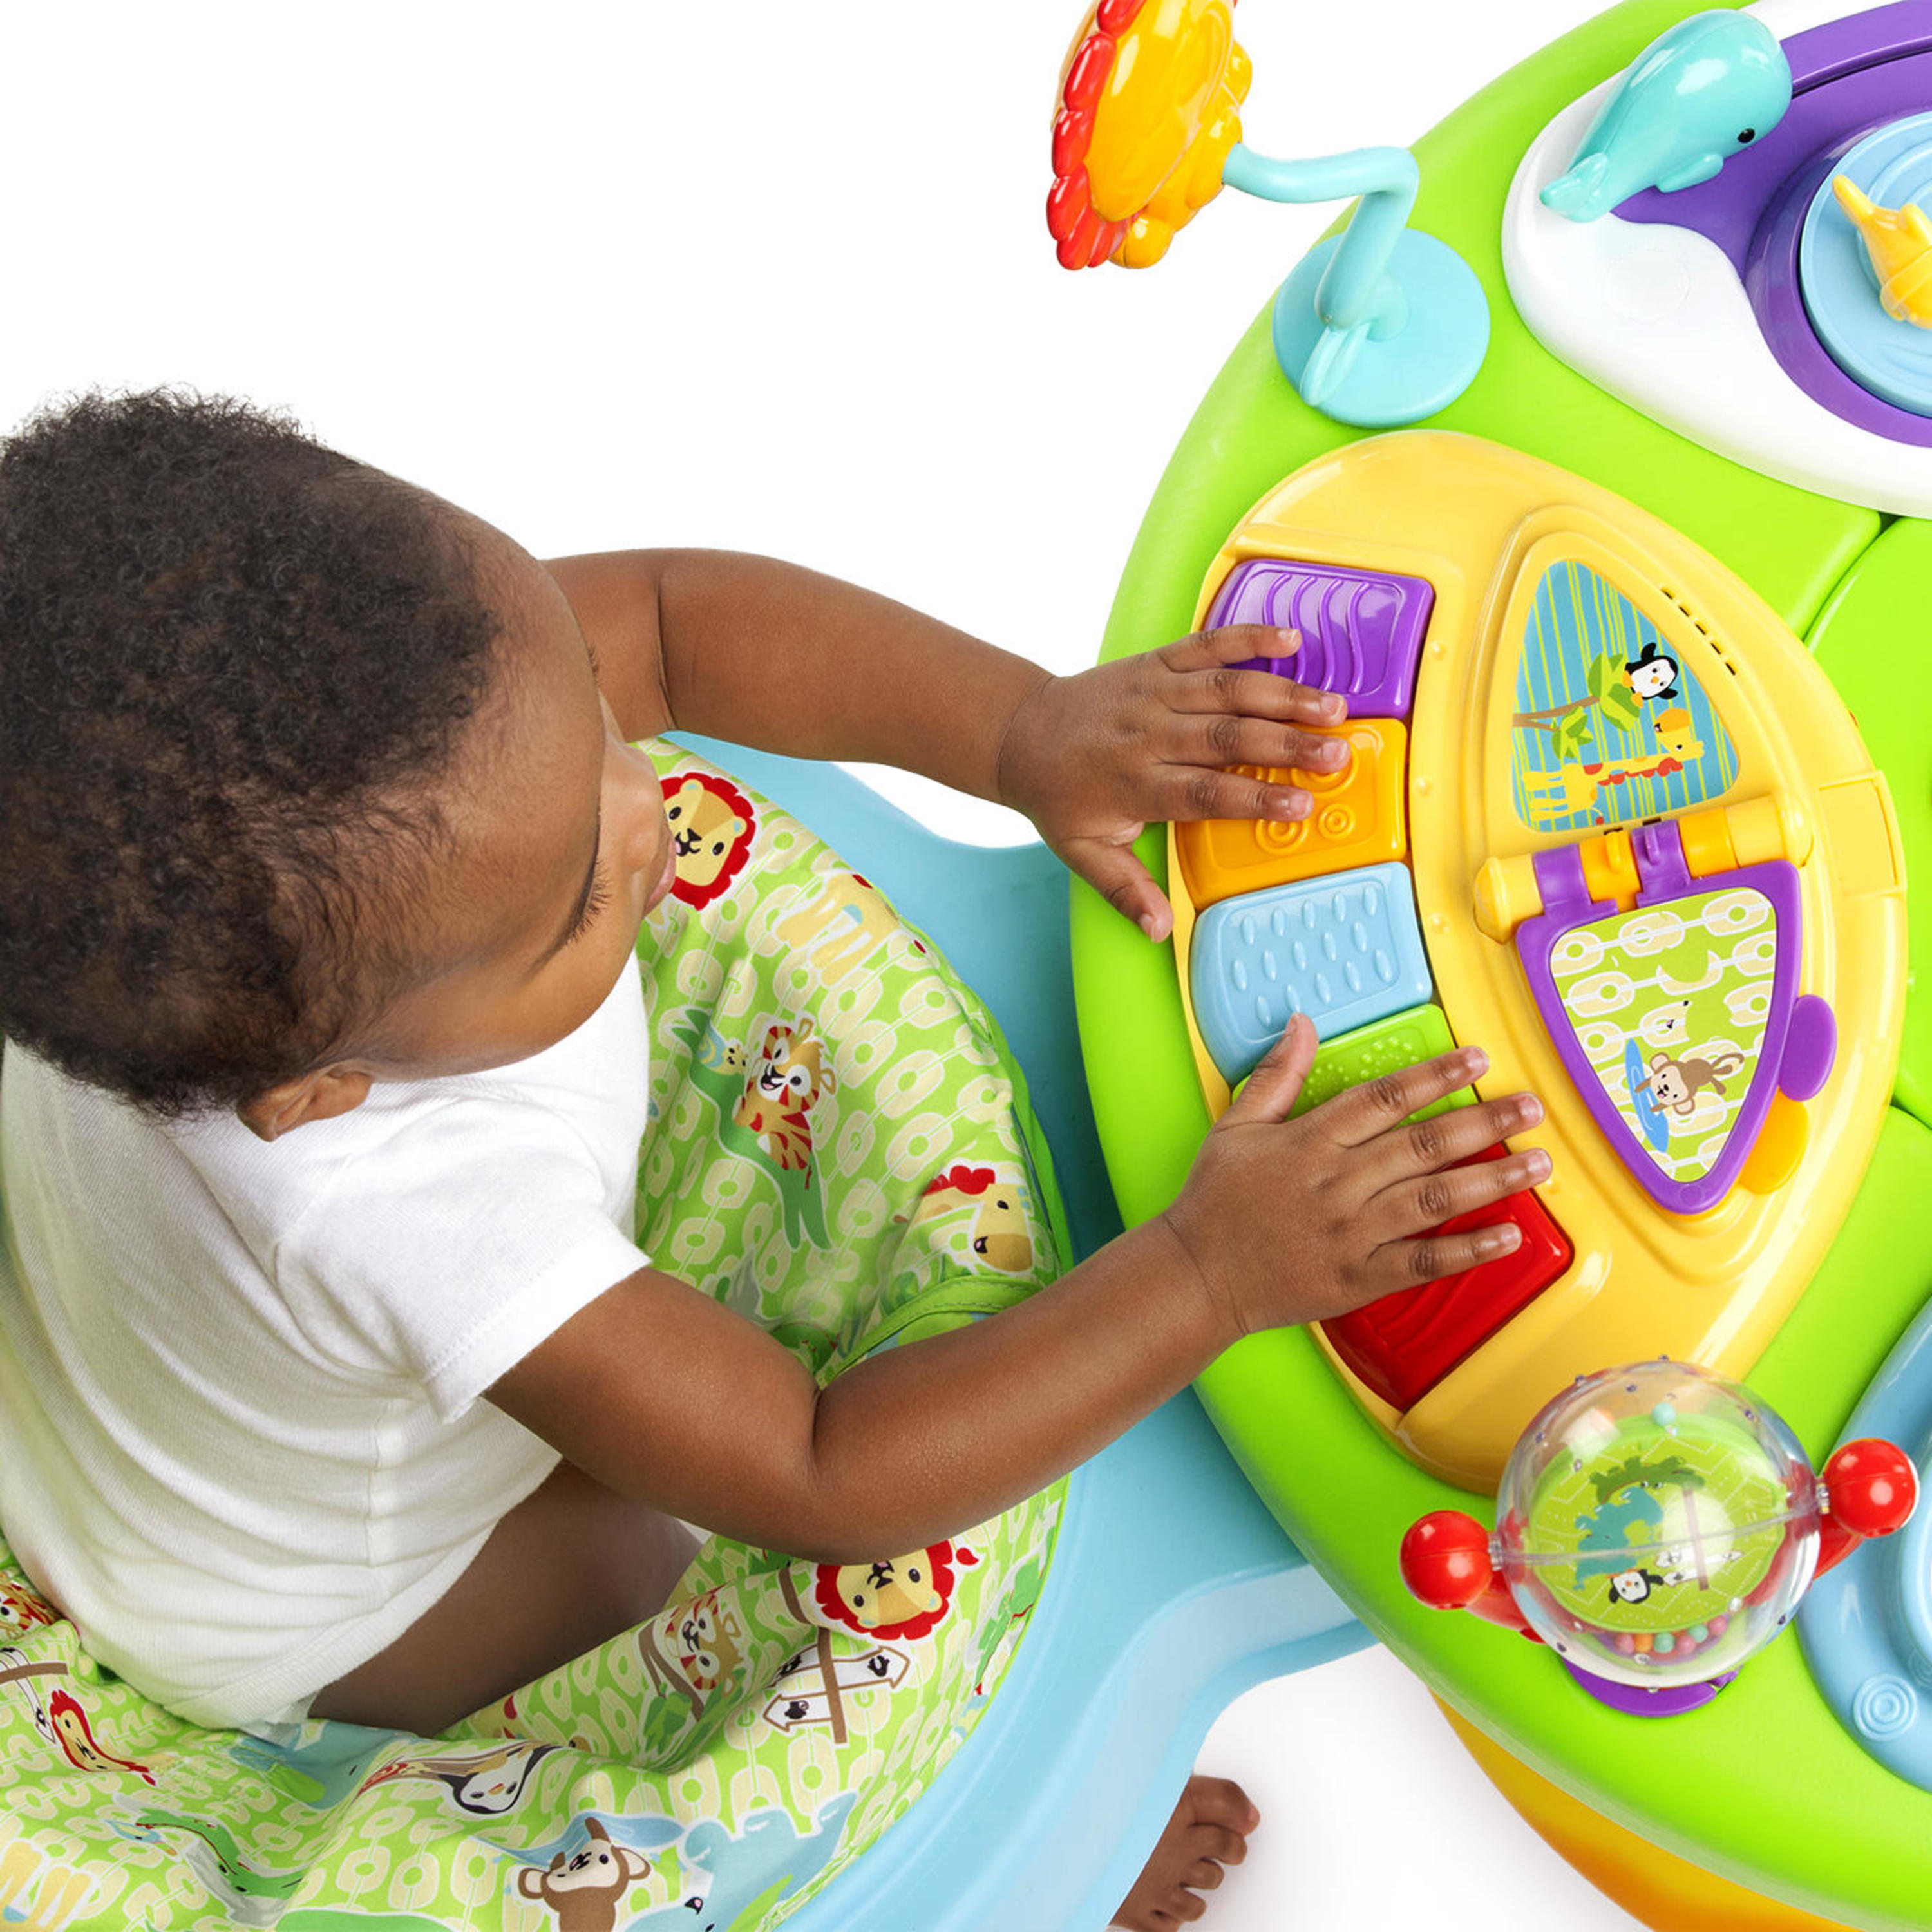 Bright Starts 3-in-1 Around We Go Activity Center, Ages 6 months + - image 4 of 7